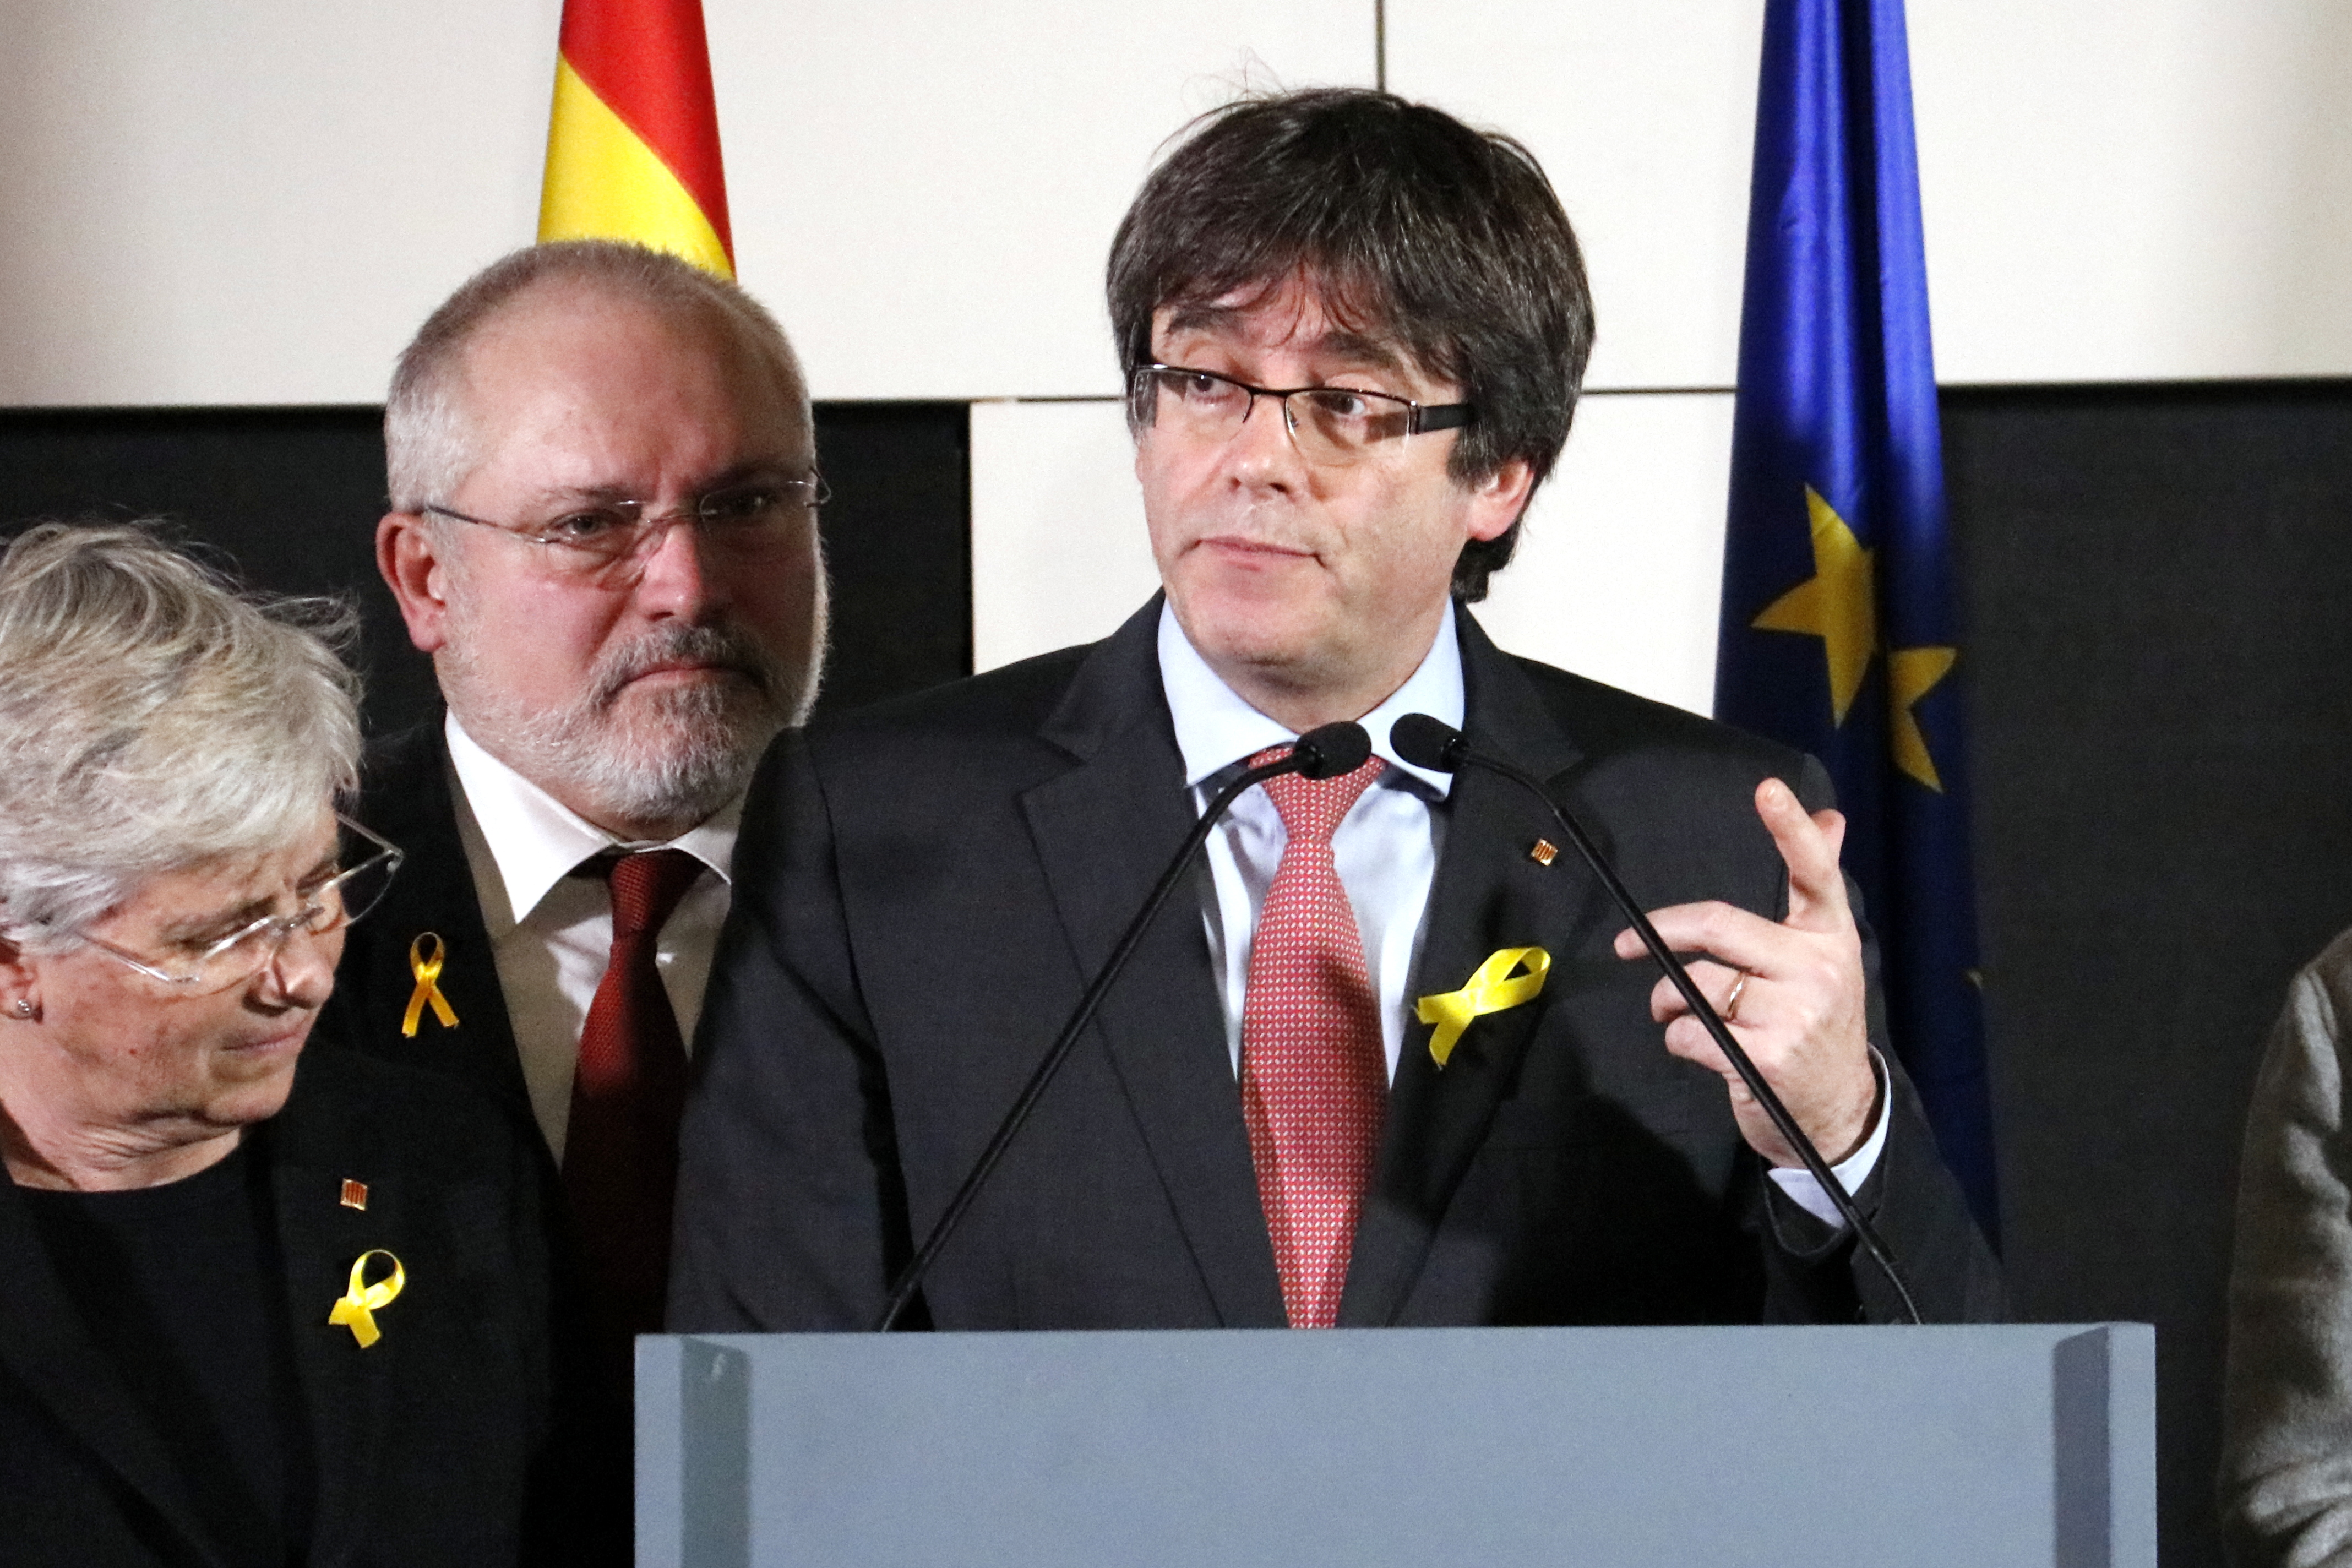 Puigdemont speaking in Brussels after count (by ACN)